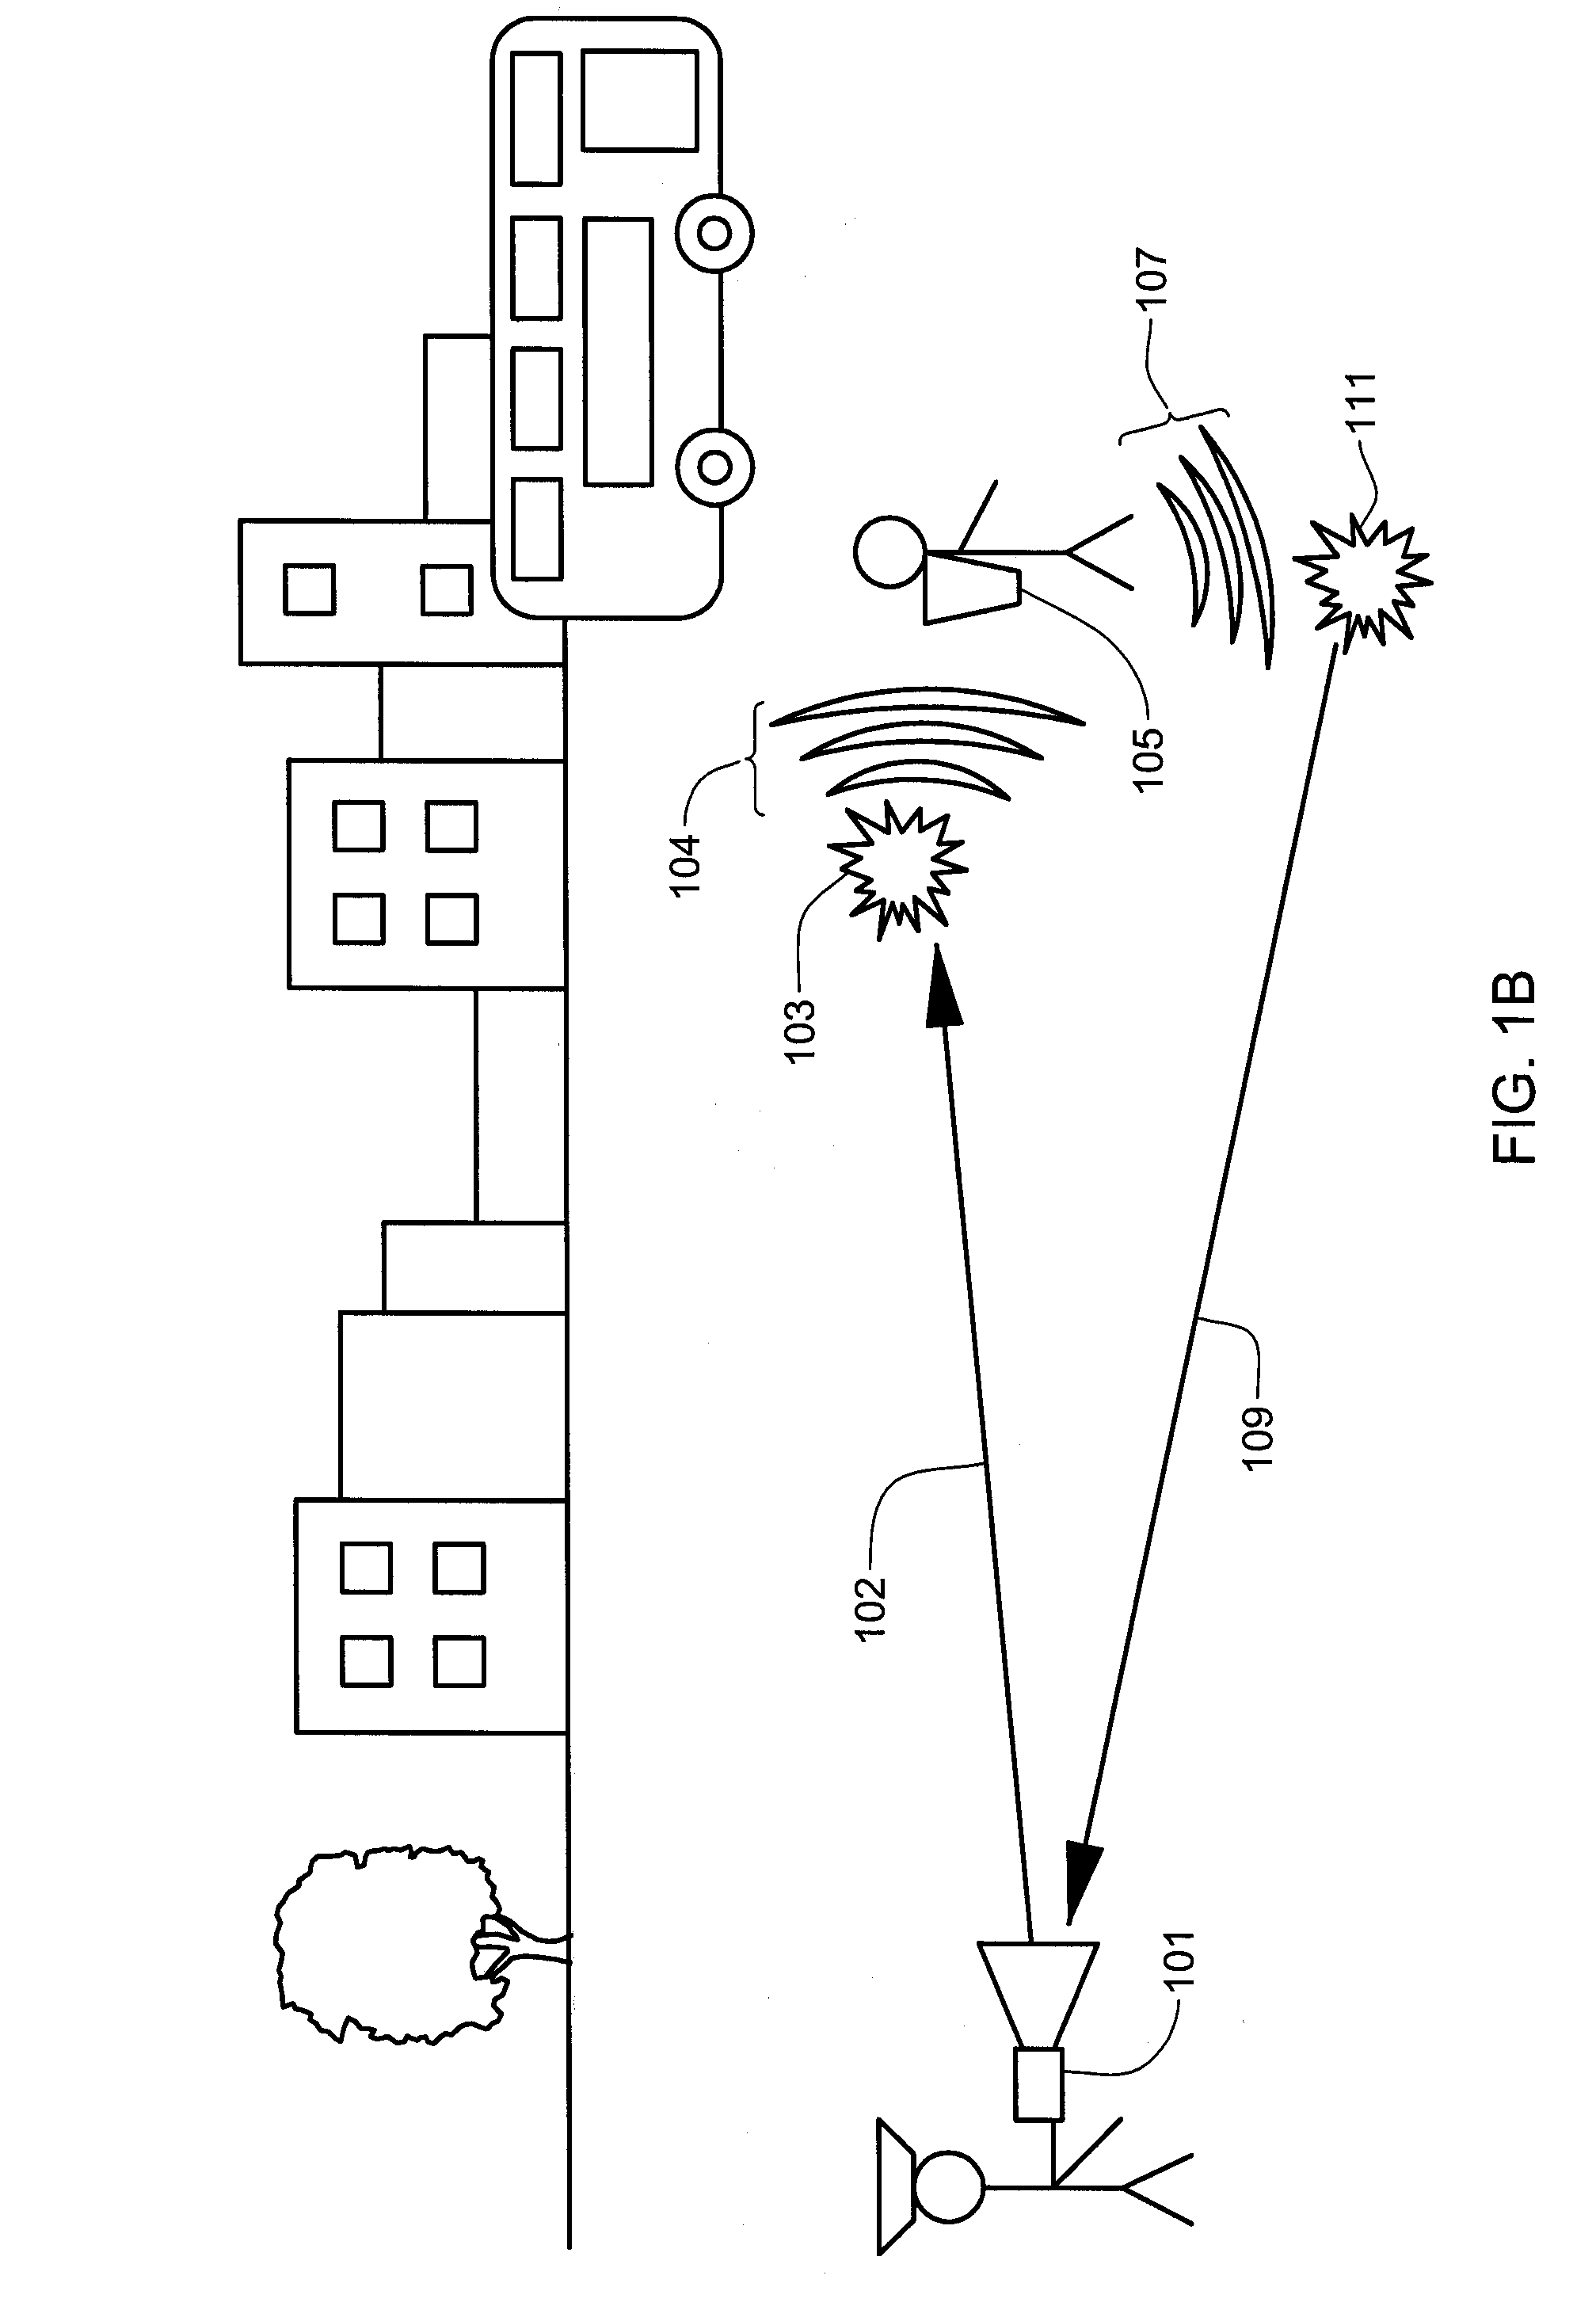 Method of analyzing a remotely-located object utilizing an optical technique to detect terahertz radiation